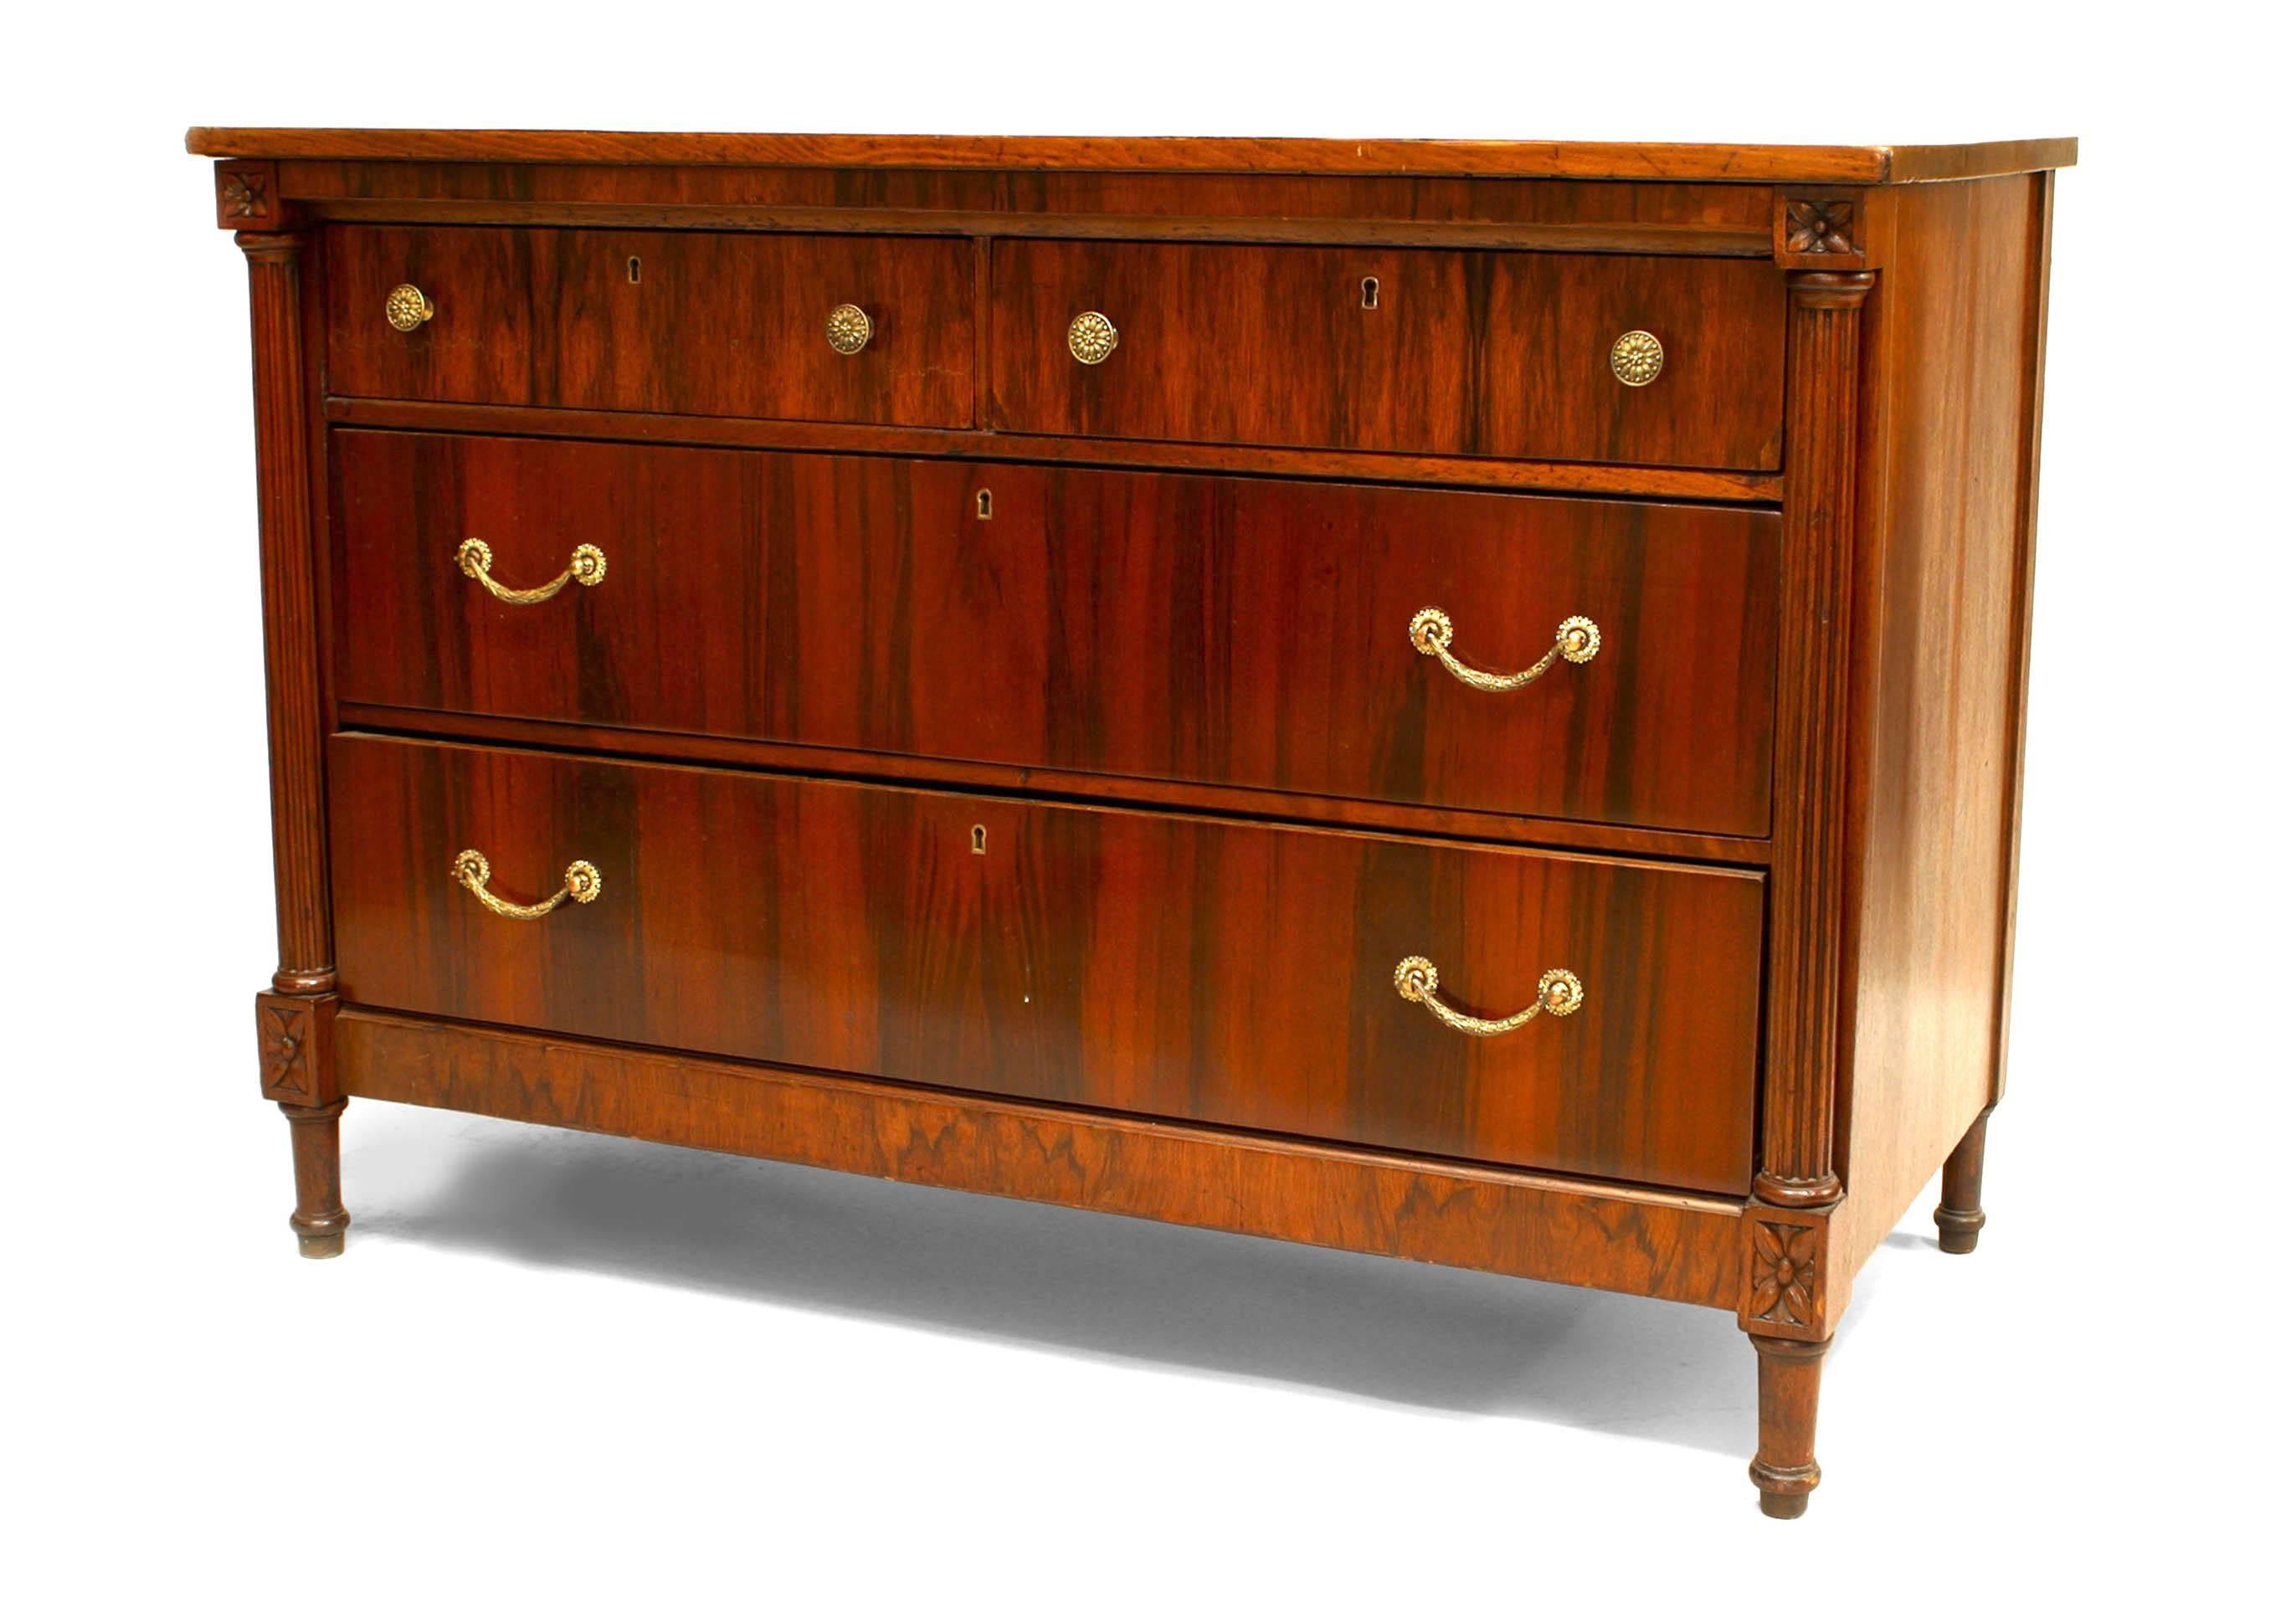 Italian Neo-classic (19th Century) walnut chest with 4 drawers and fluted column sides.
